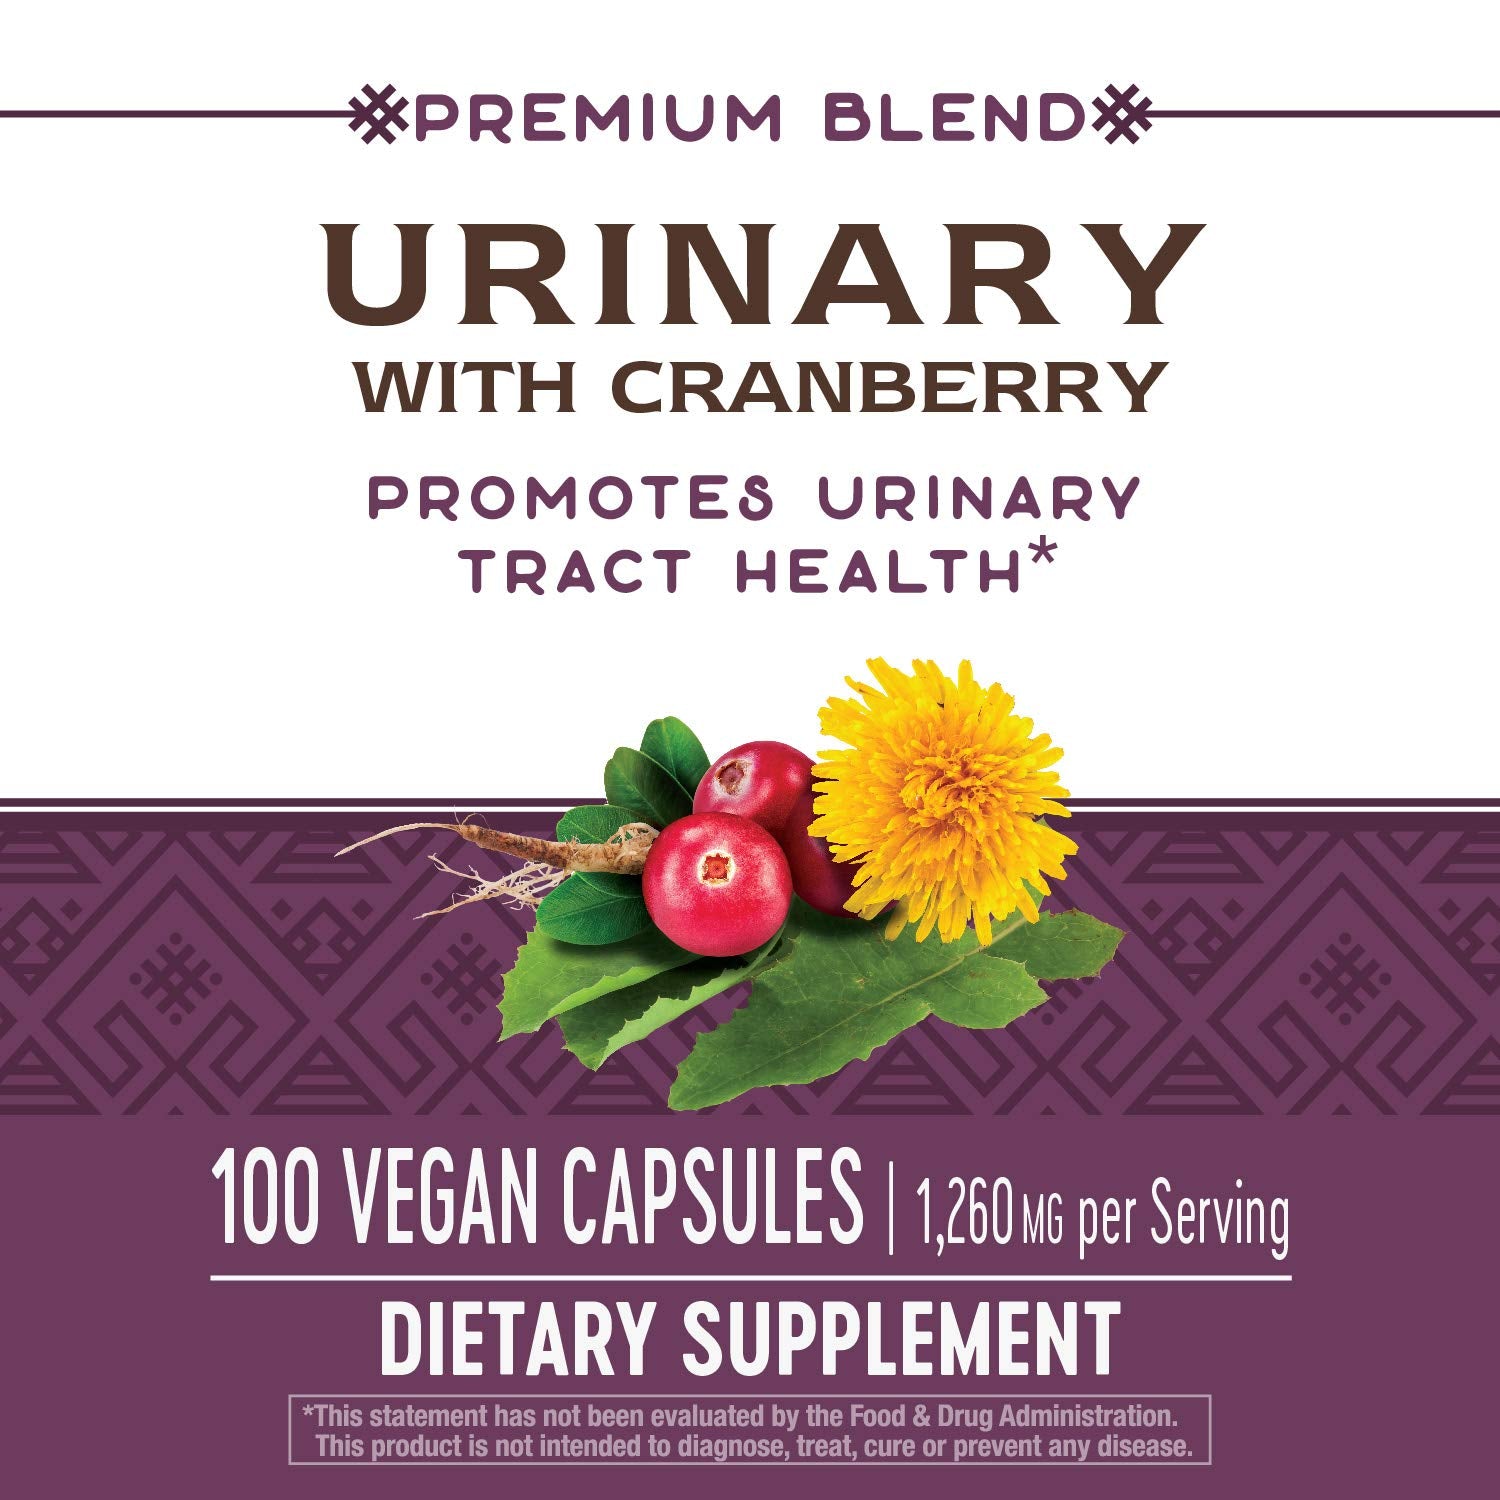 Nature's Way Urinary with Cranberry, 1,260 mg per serving, 100 Capsules